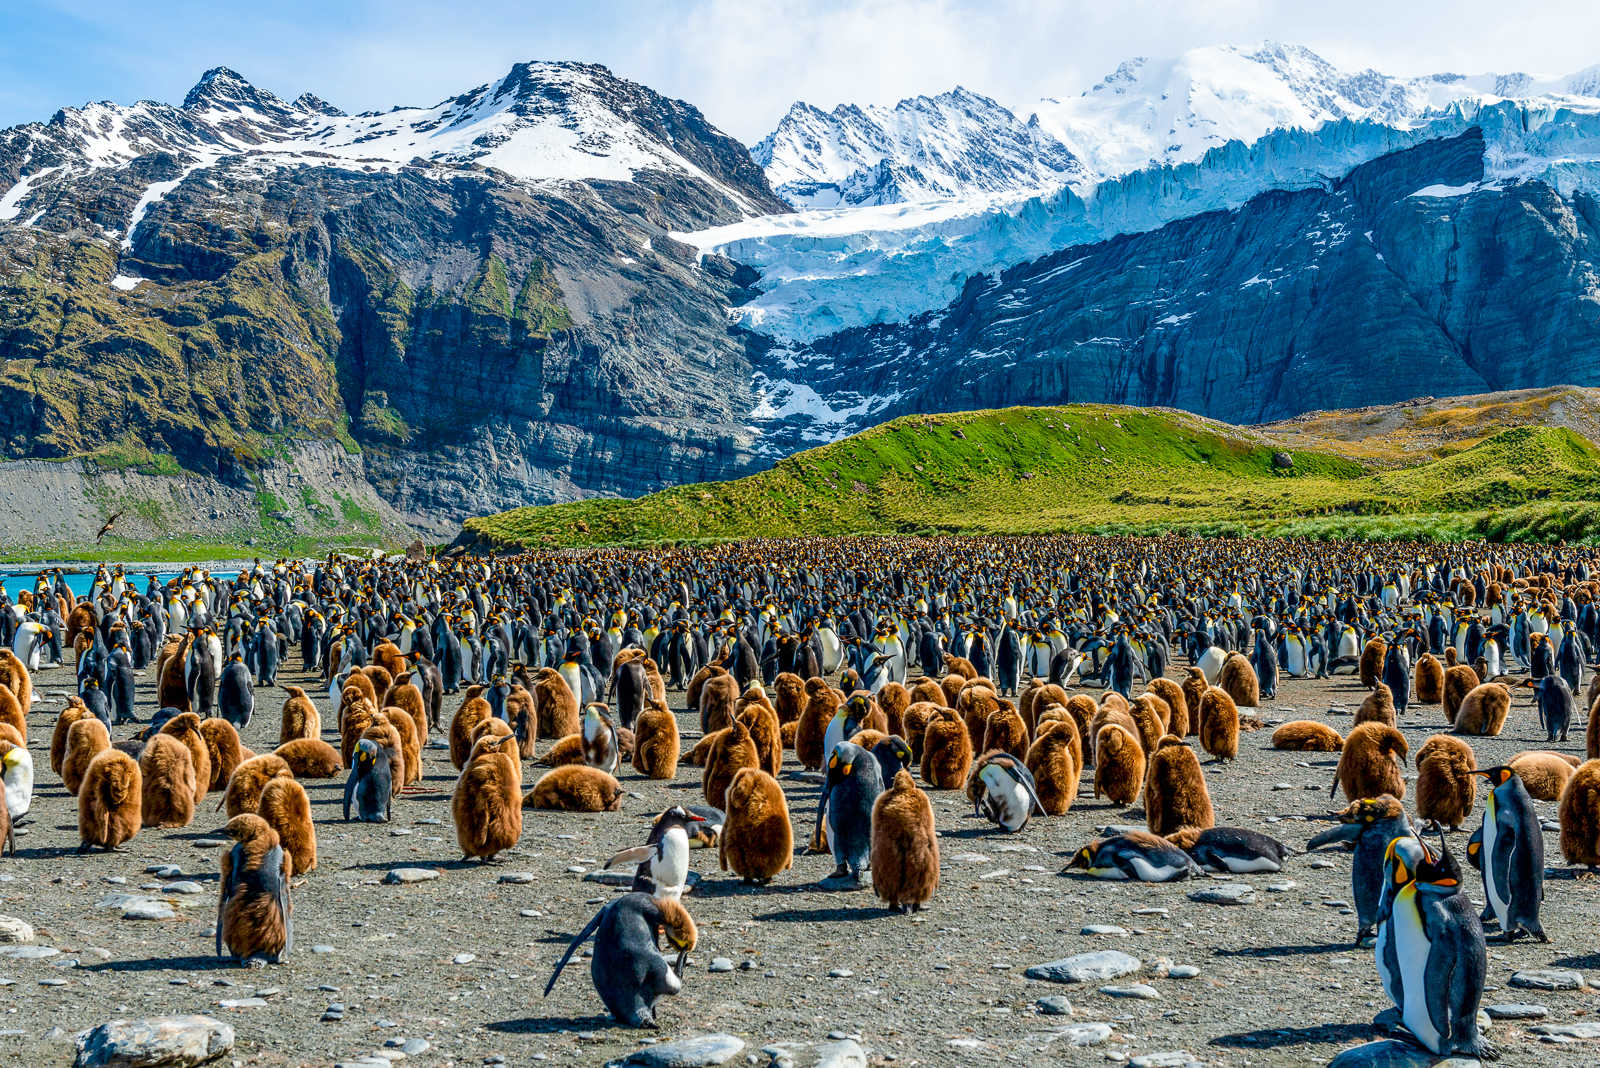 A colony of penguins in South Georgia